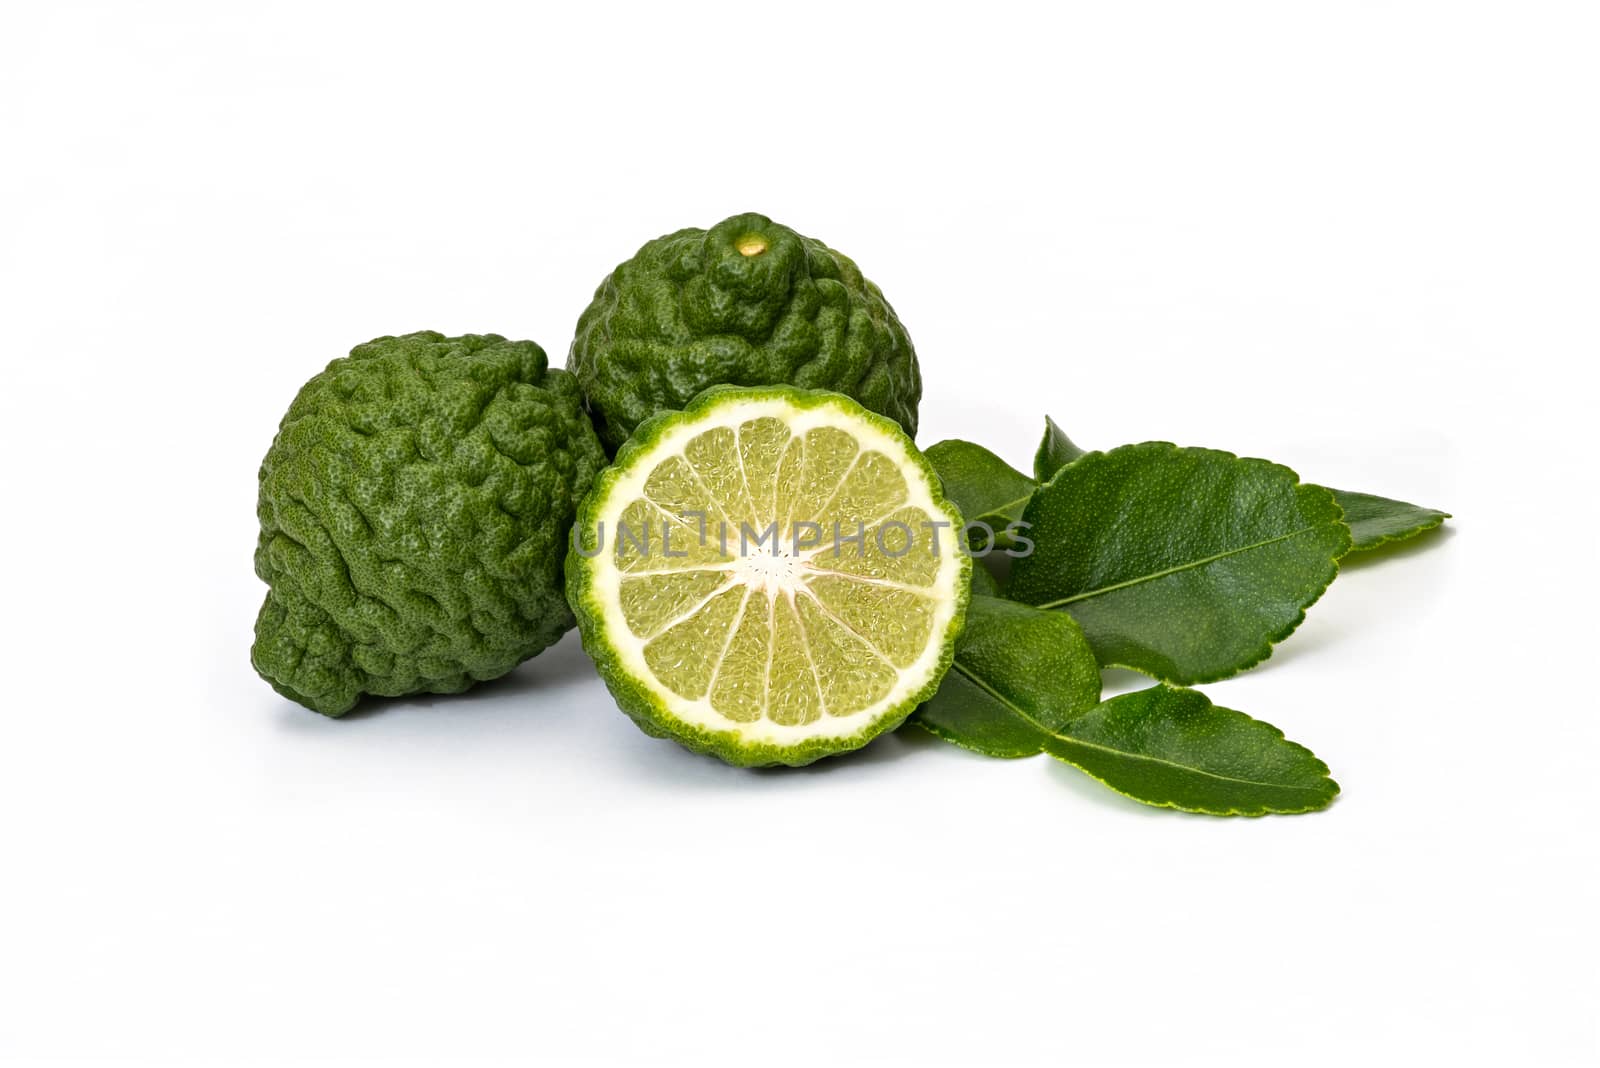 Bergamot fruit kaffir limes and green leaves for herbal products on a white background